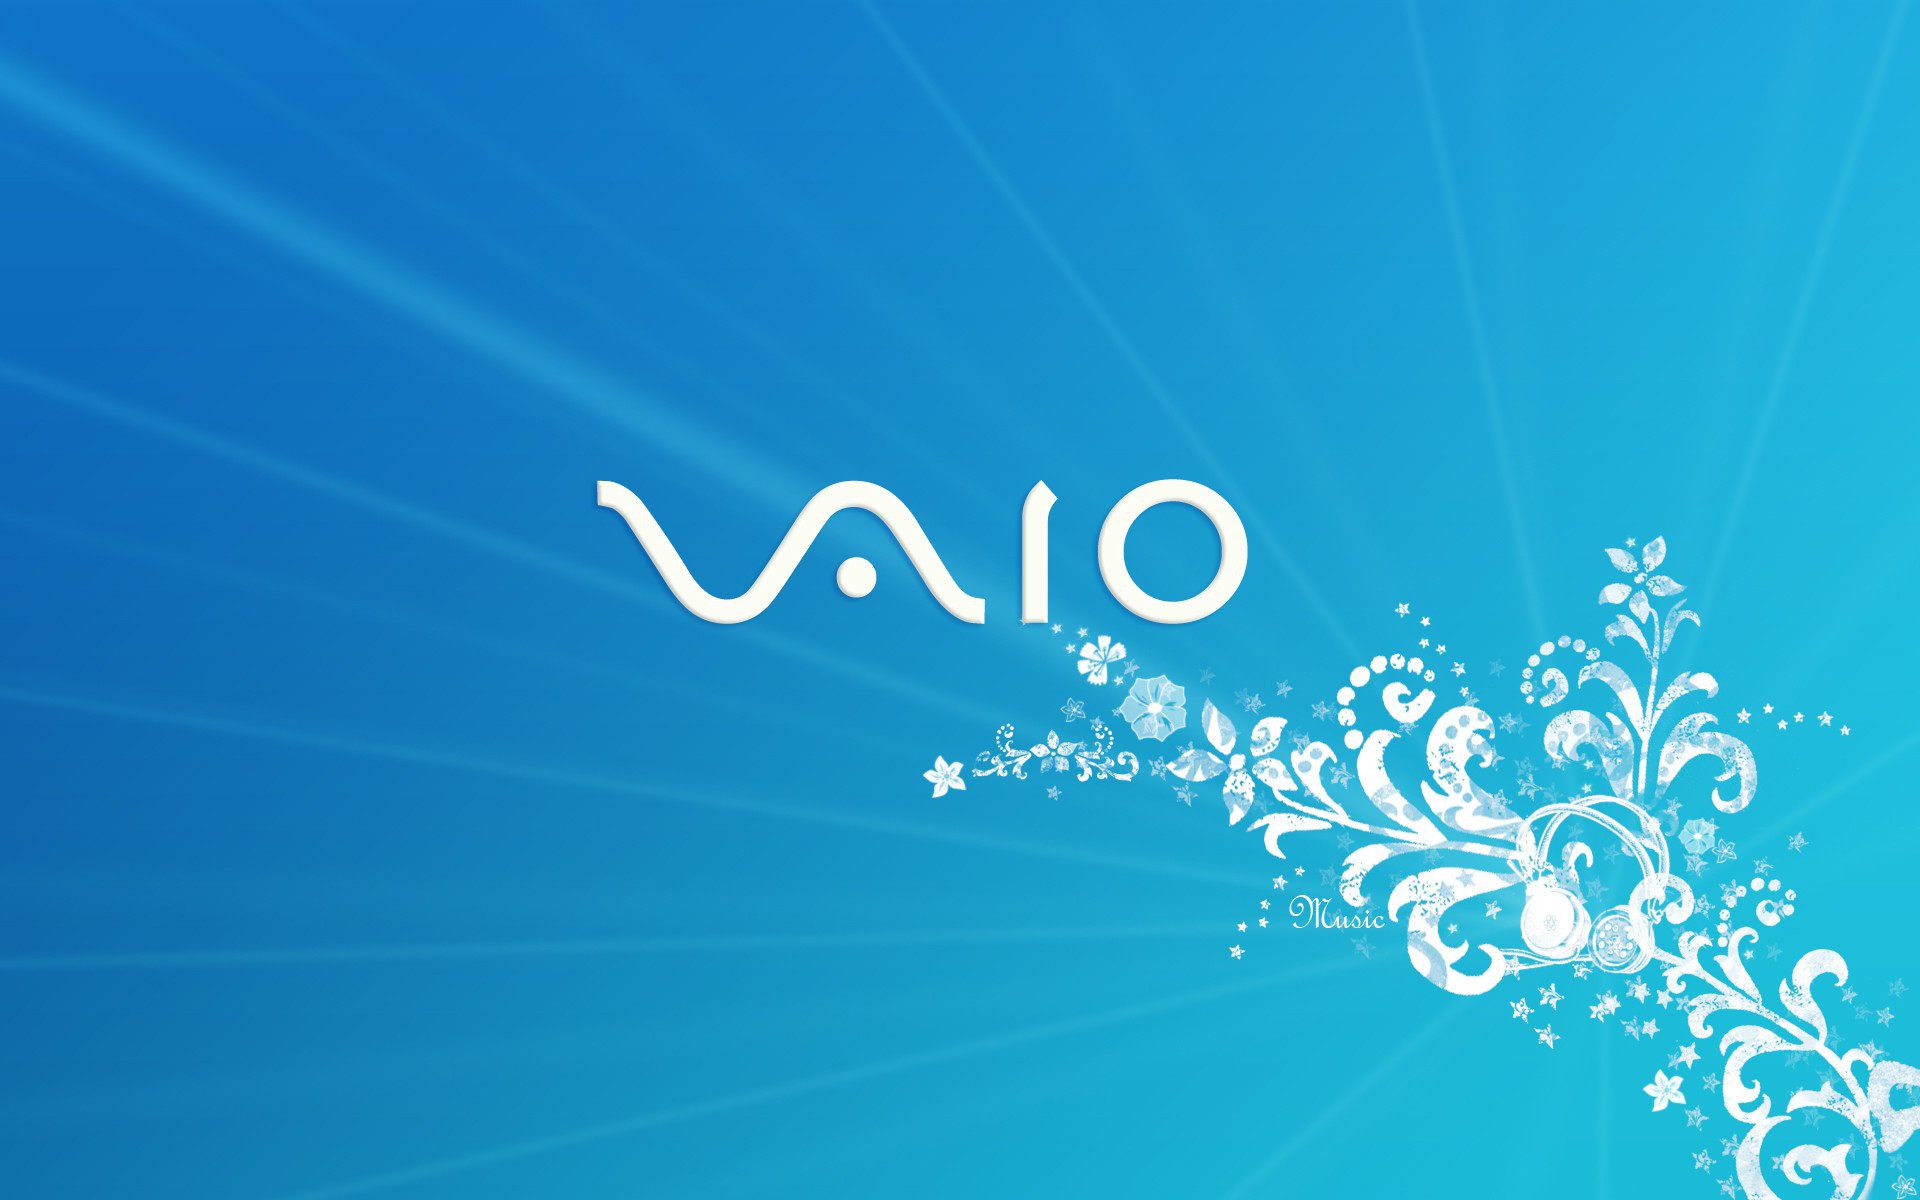 1920x1200 Sony VAIO 12 wallpapers (39 Wallpapers)